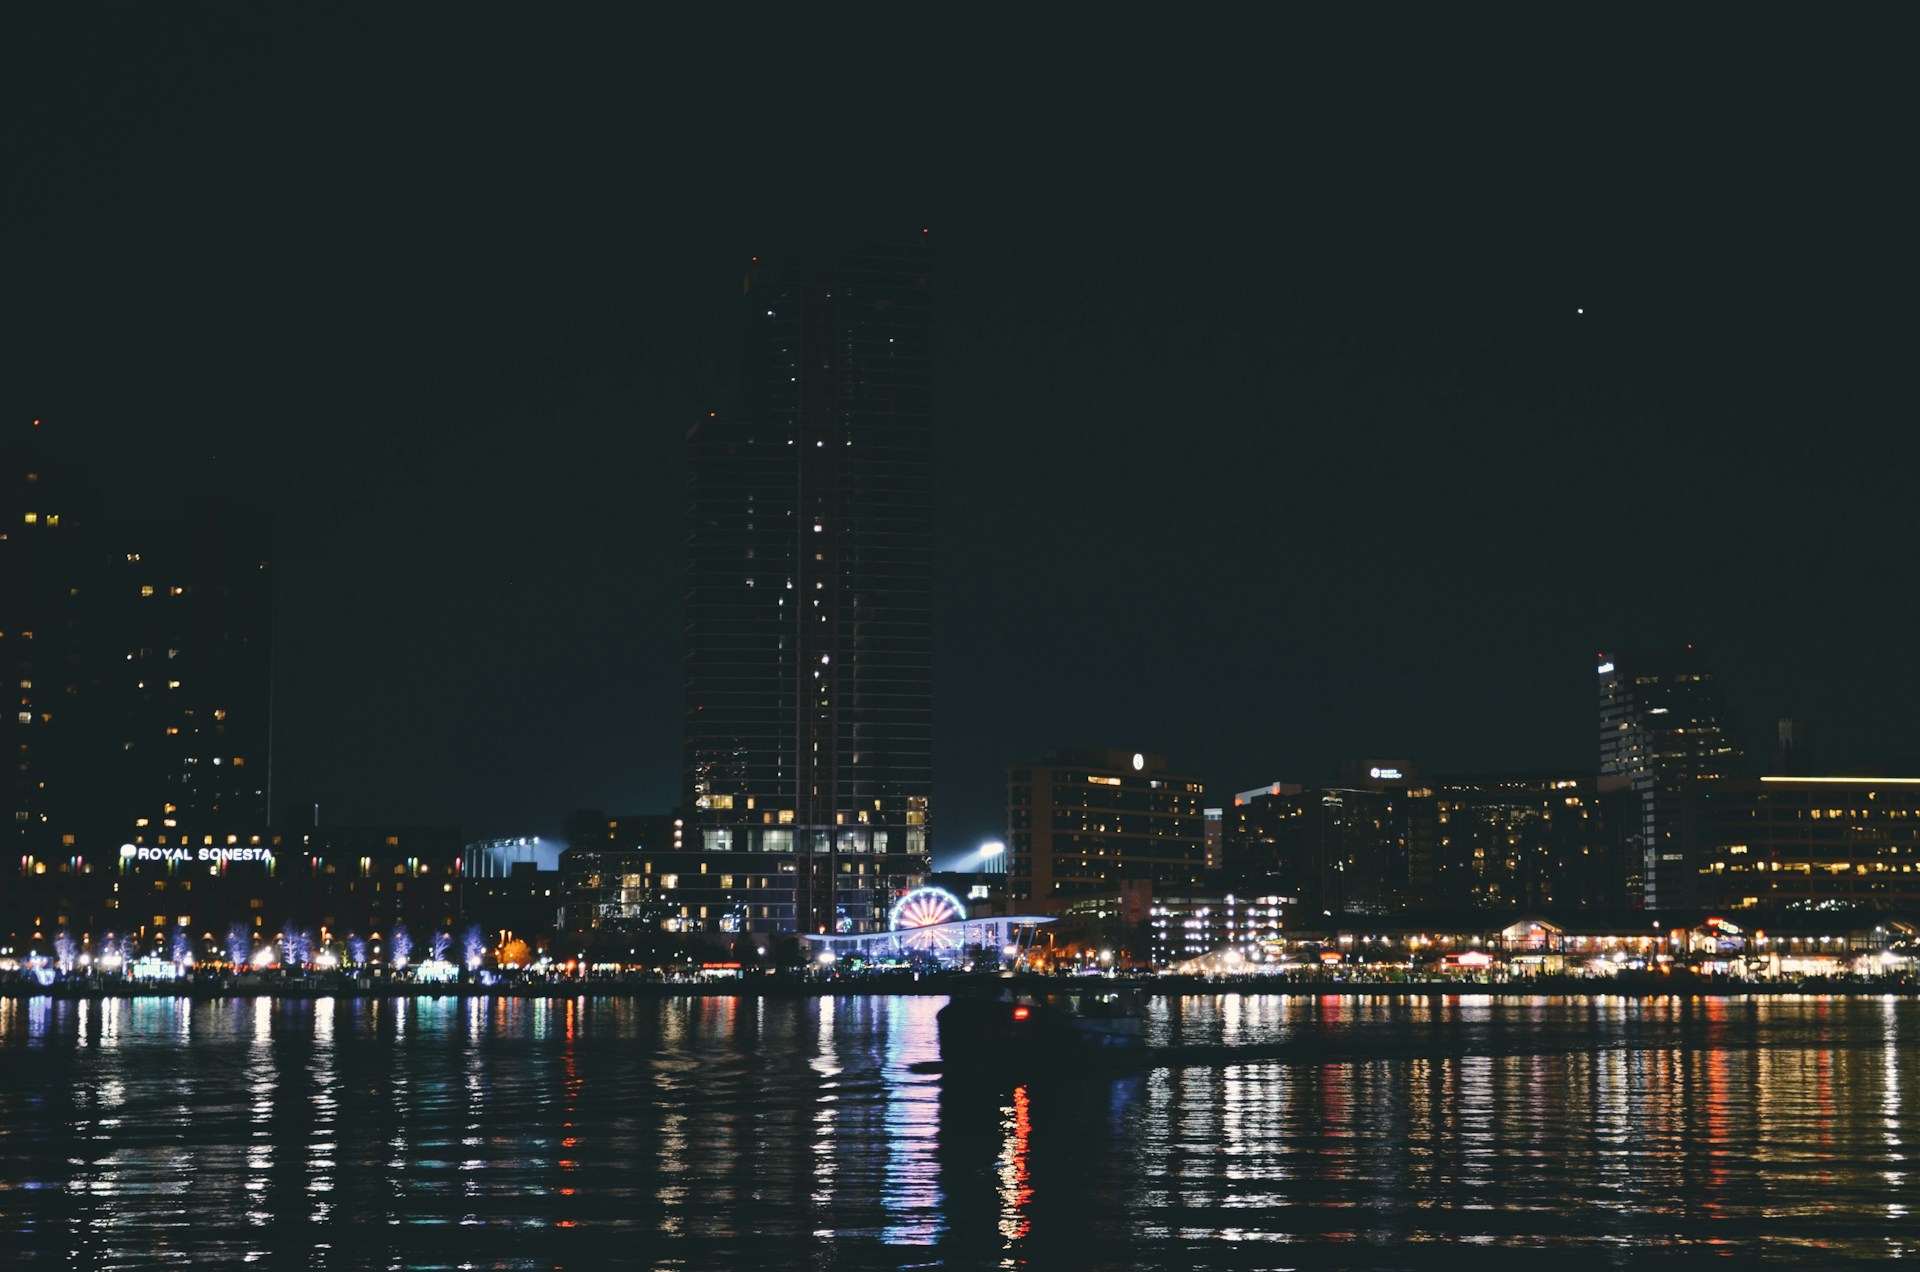 Baltimore at night as seen from the water